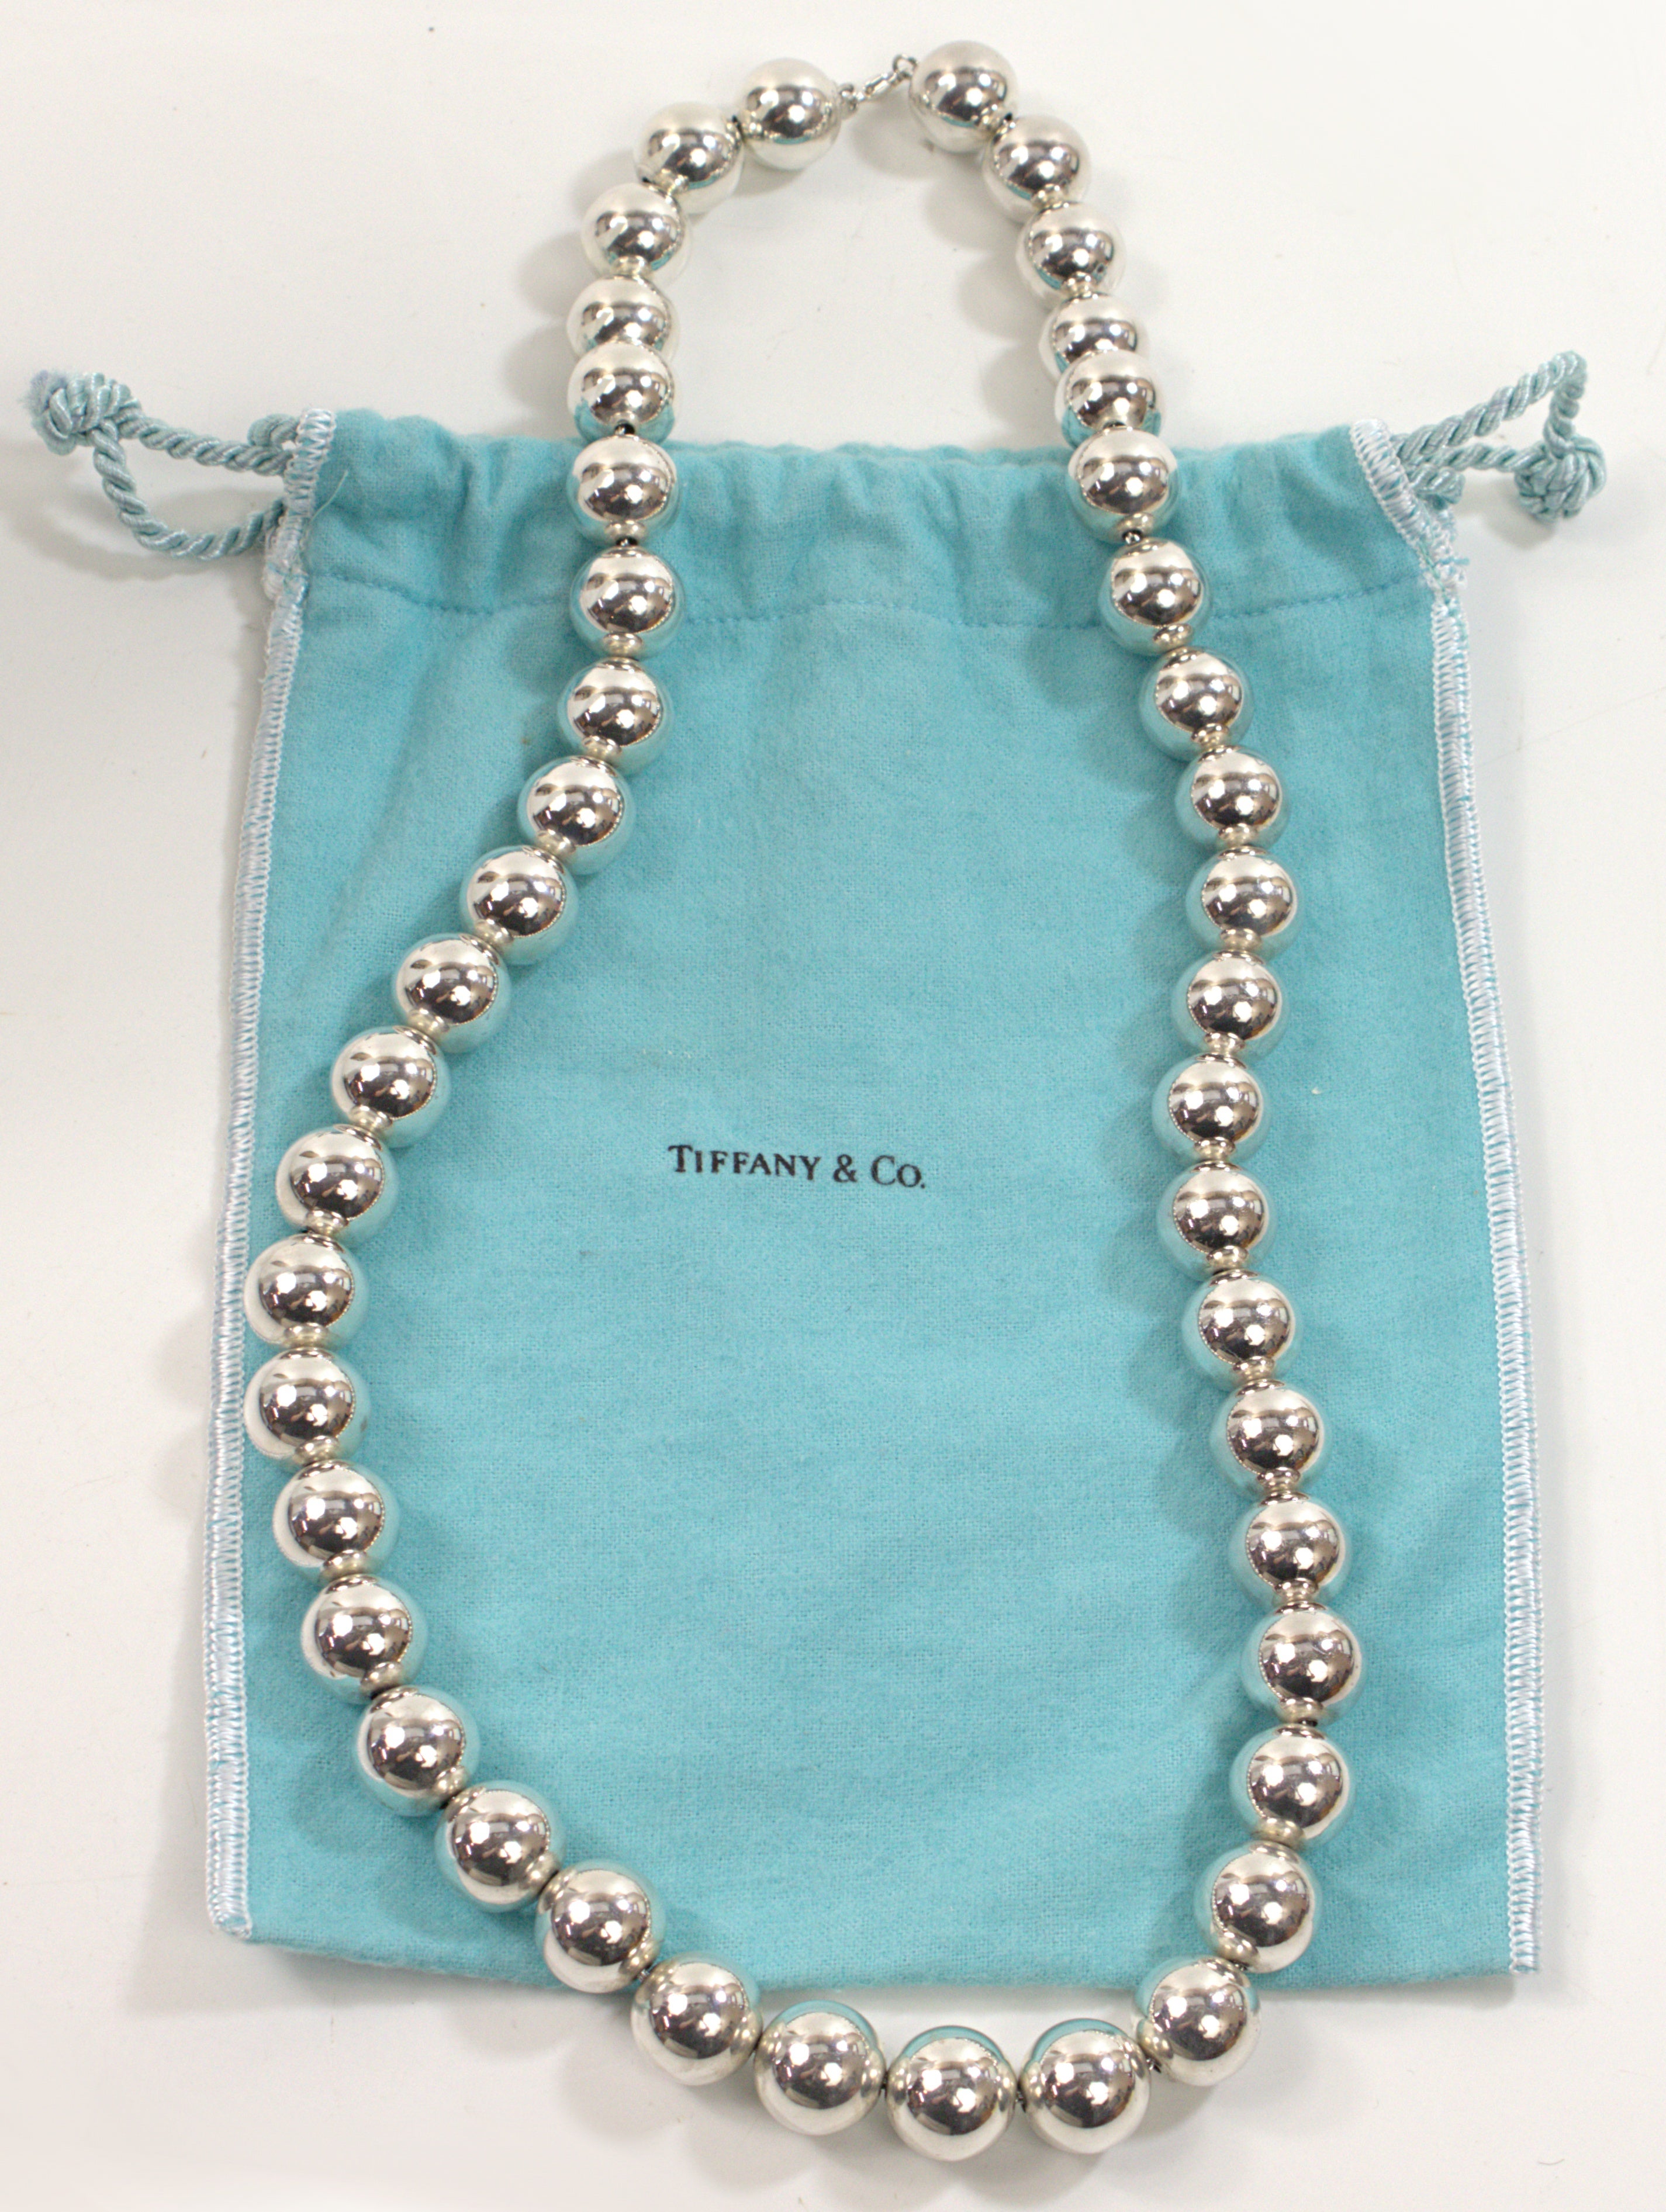 Composed of (44) sterling silver ball beads, 16 mm, strung on a sterling link chain, completed by a lobster claw clasp and Tiffany & Co tag, marked 925, © Tiffany & Co, forming a 28-inch necklace, Total weight 145.76 grams, accompanied by Tiffany &